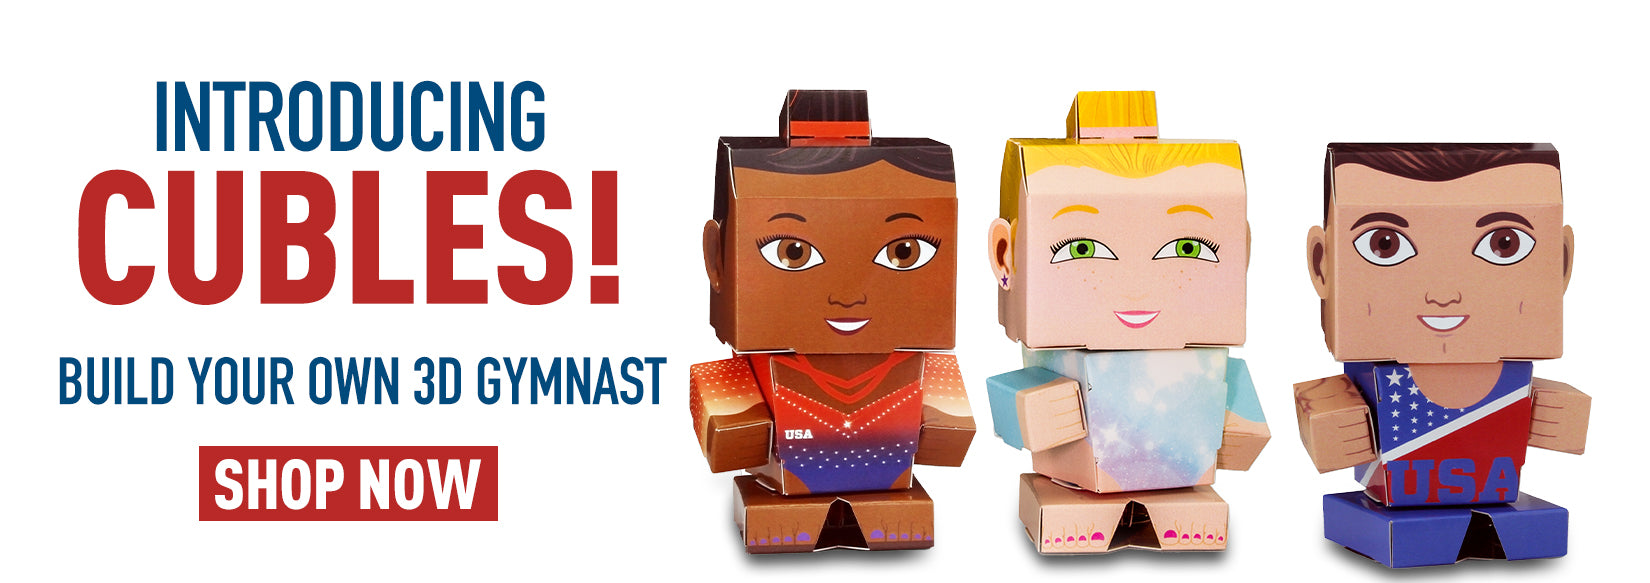 Introducing Cubles! build your own 3D gymnast! Shop now.